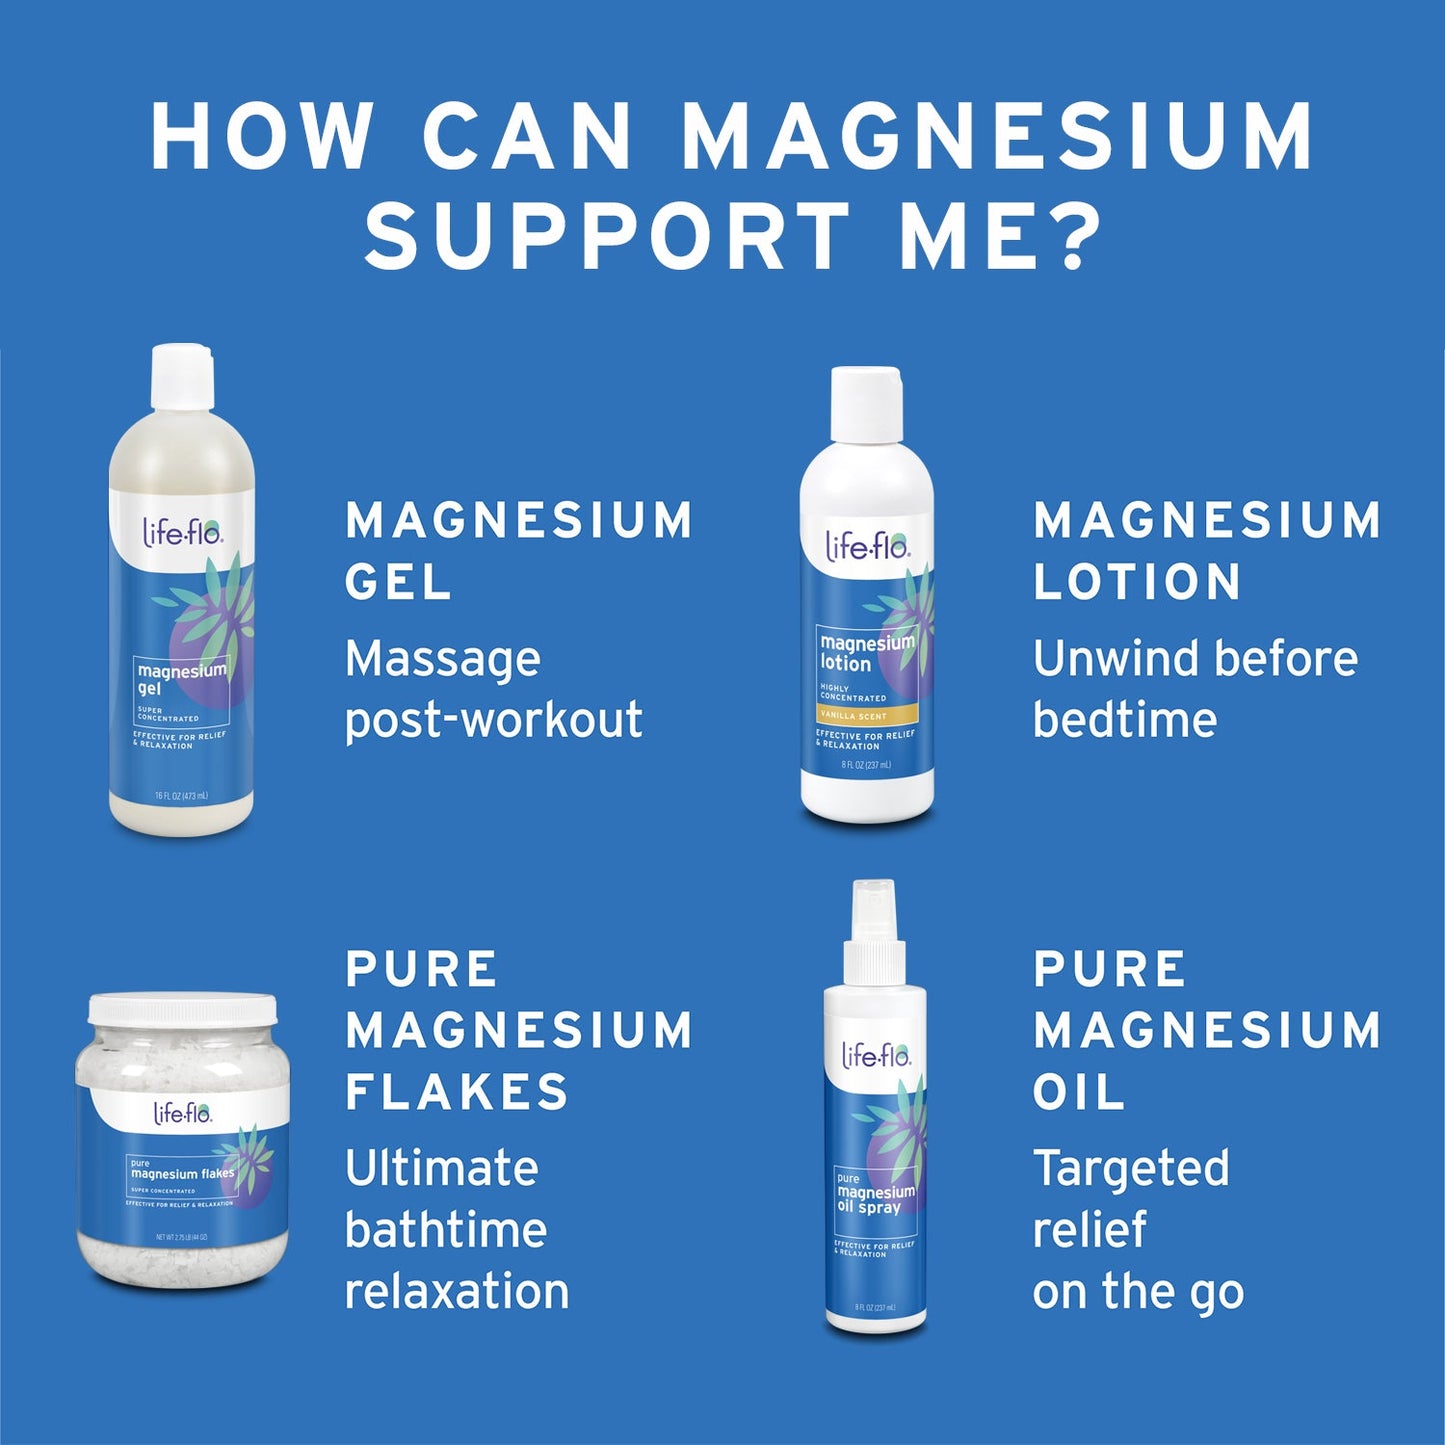 Life-flo Magnesium Oil Night Spray, Soothing Magnesium Spray w/ Magnesium Chloride from Zechstein Seabed and Lavender Oil, Calms and Relaxes Body and Mind, 60-Day Guarantee, Not Tested on Animals (2oz)